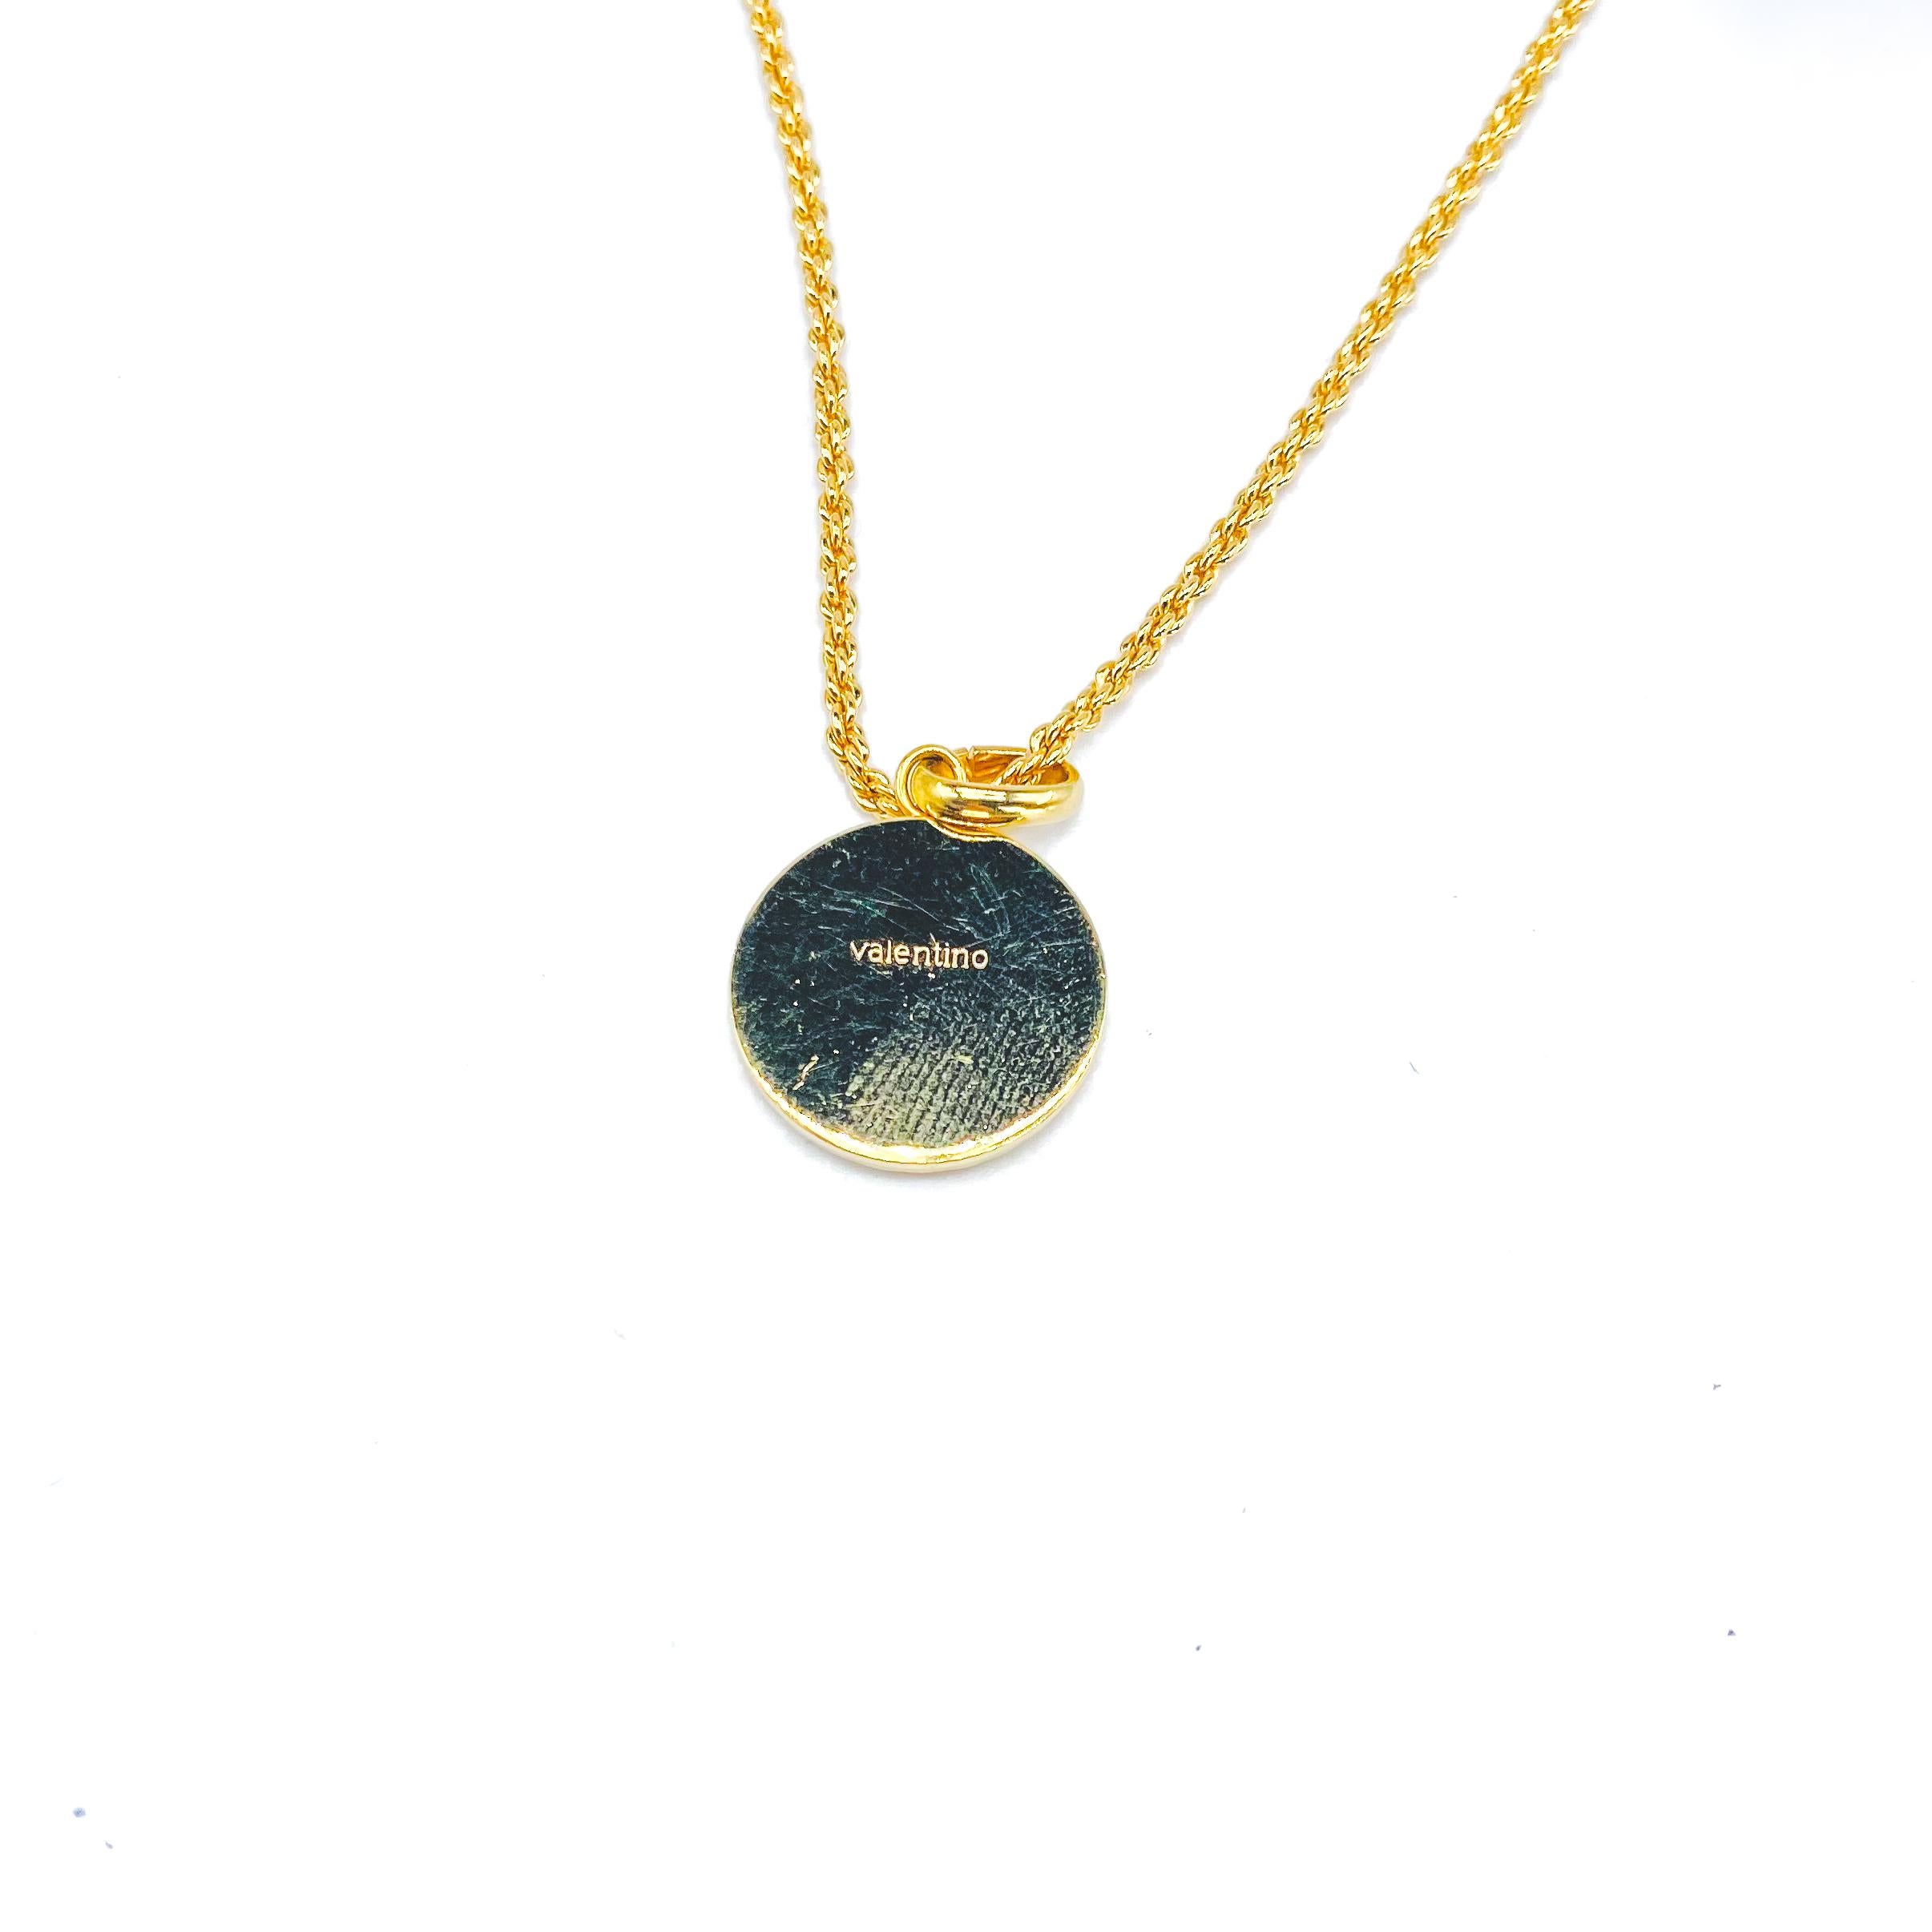 Valentino Vintage 1990s Necklace

Cute little 'V' 90s pendant from the Maison Valentino. Wear solo or layer up for impact

Detail
-Made in Italy in the 90s
-Gold plated metal
-Delicate chain with small circular pendant featuring the iconic Valentino